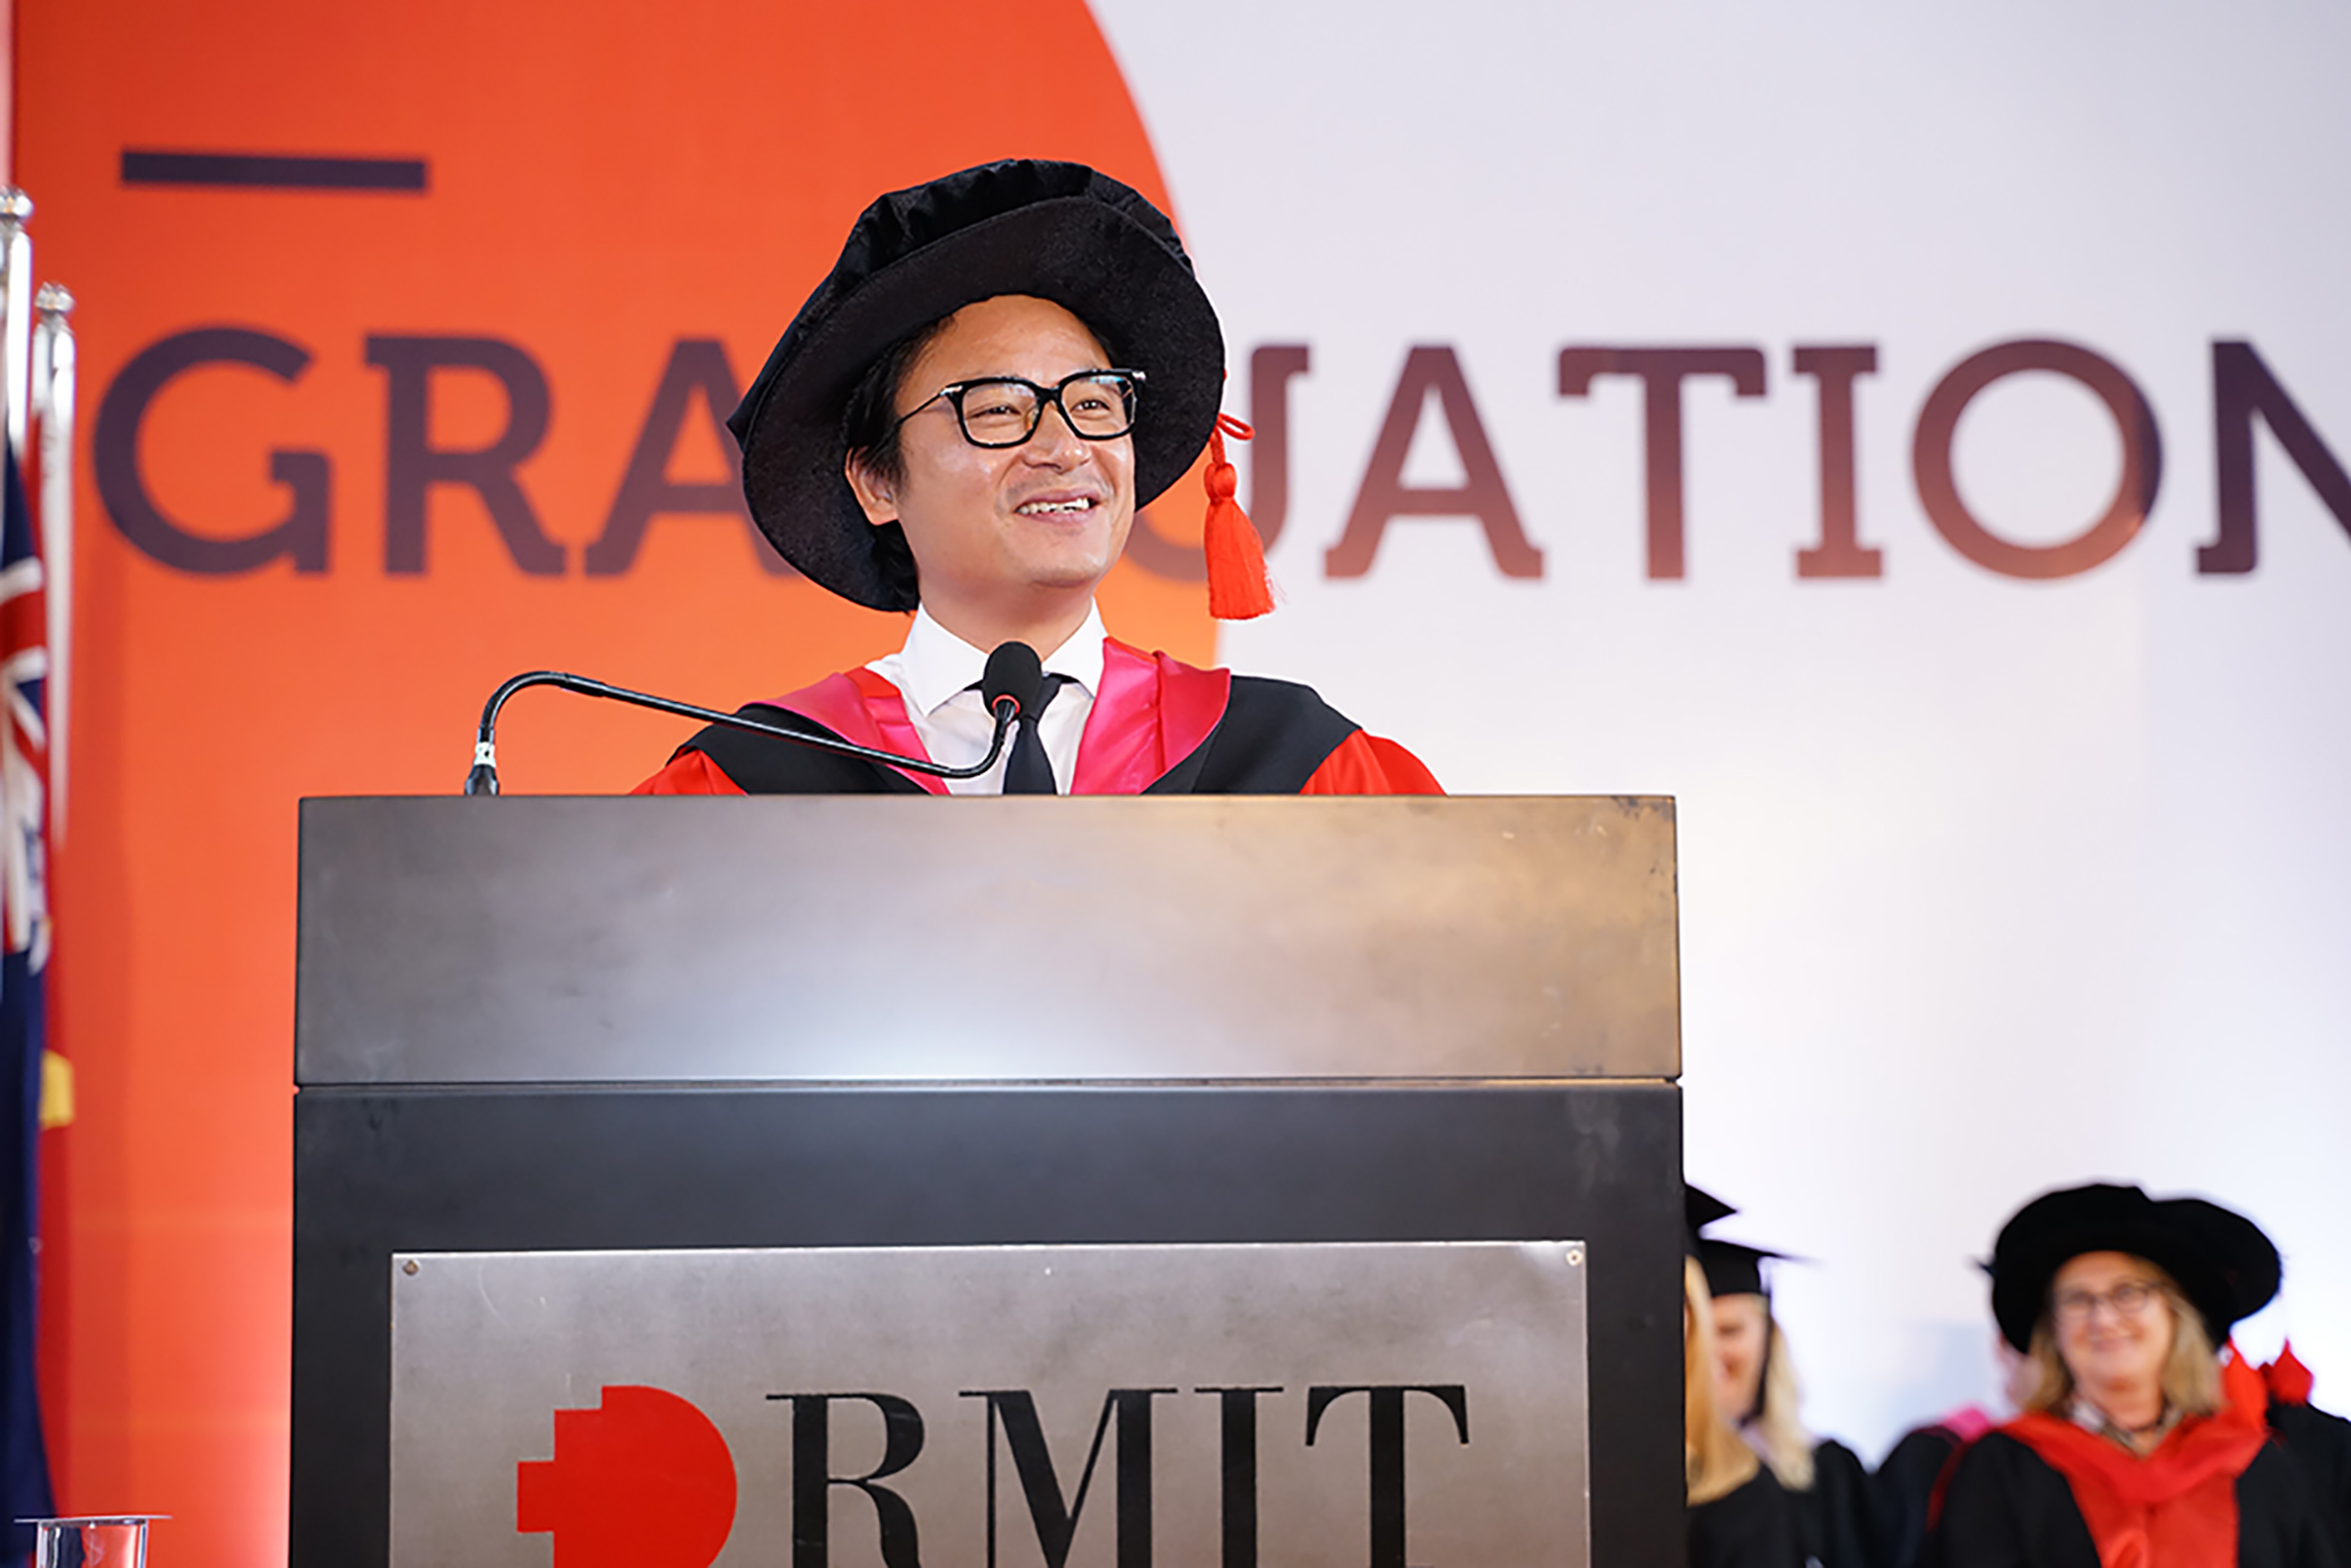 Luke Nguyen asked RMIT’s new graduates to always believe in themselves, don’t be left thinking ‘what if’, be passionate about whatever they do, and never stop learning.